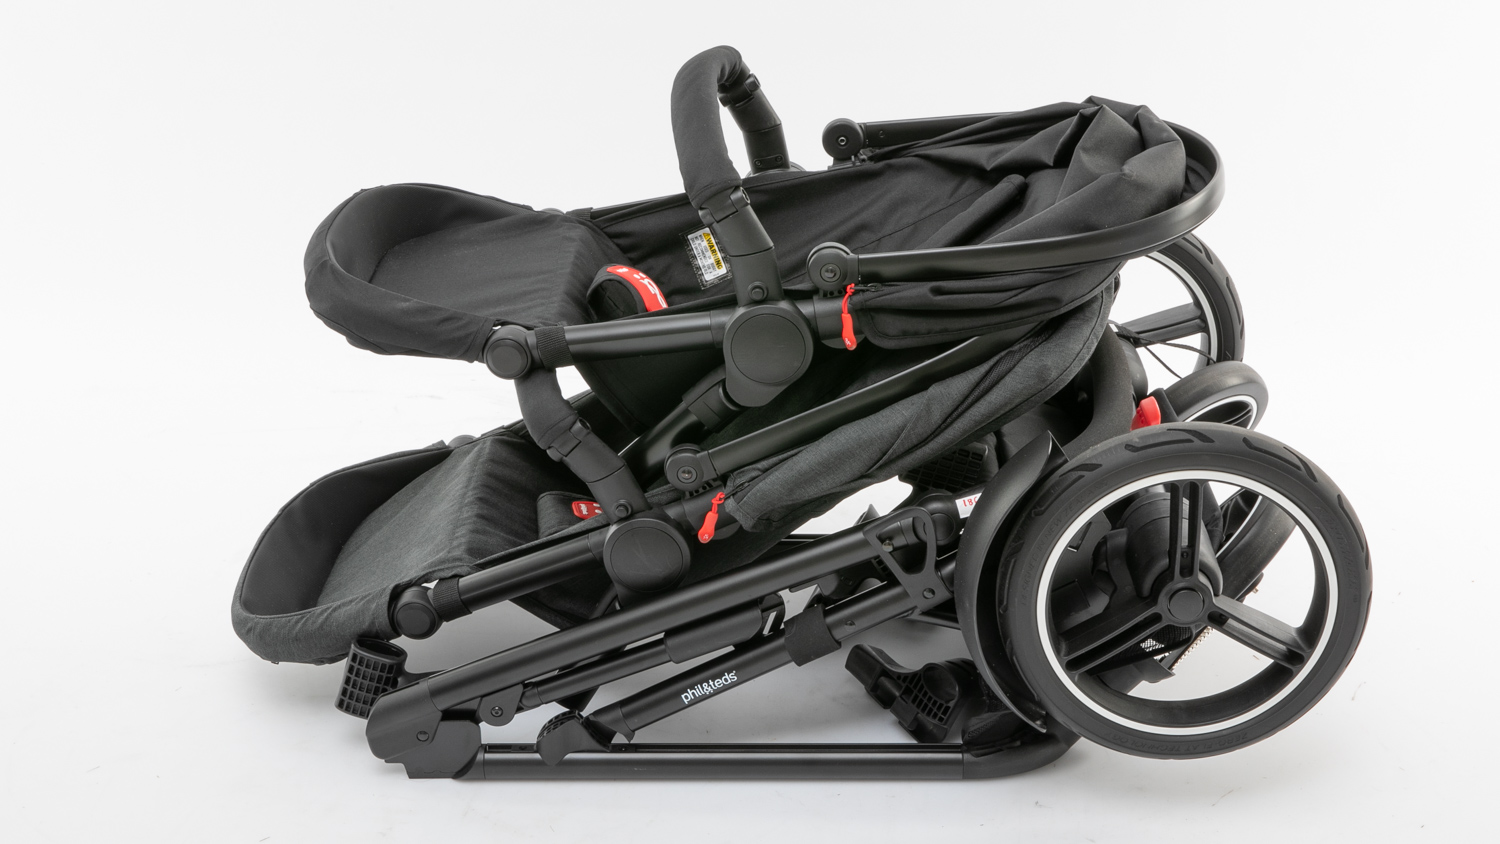 phil & teds voyager double buggy